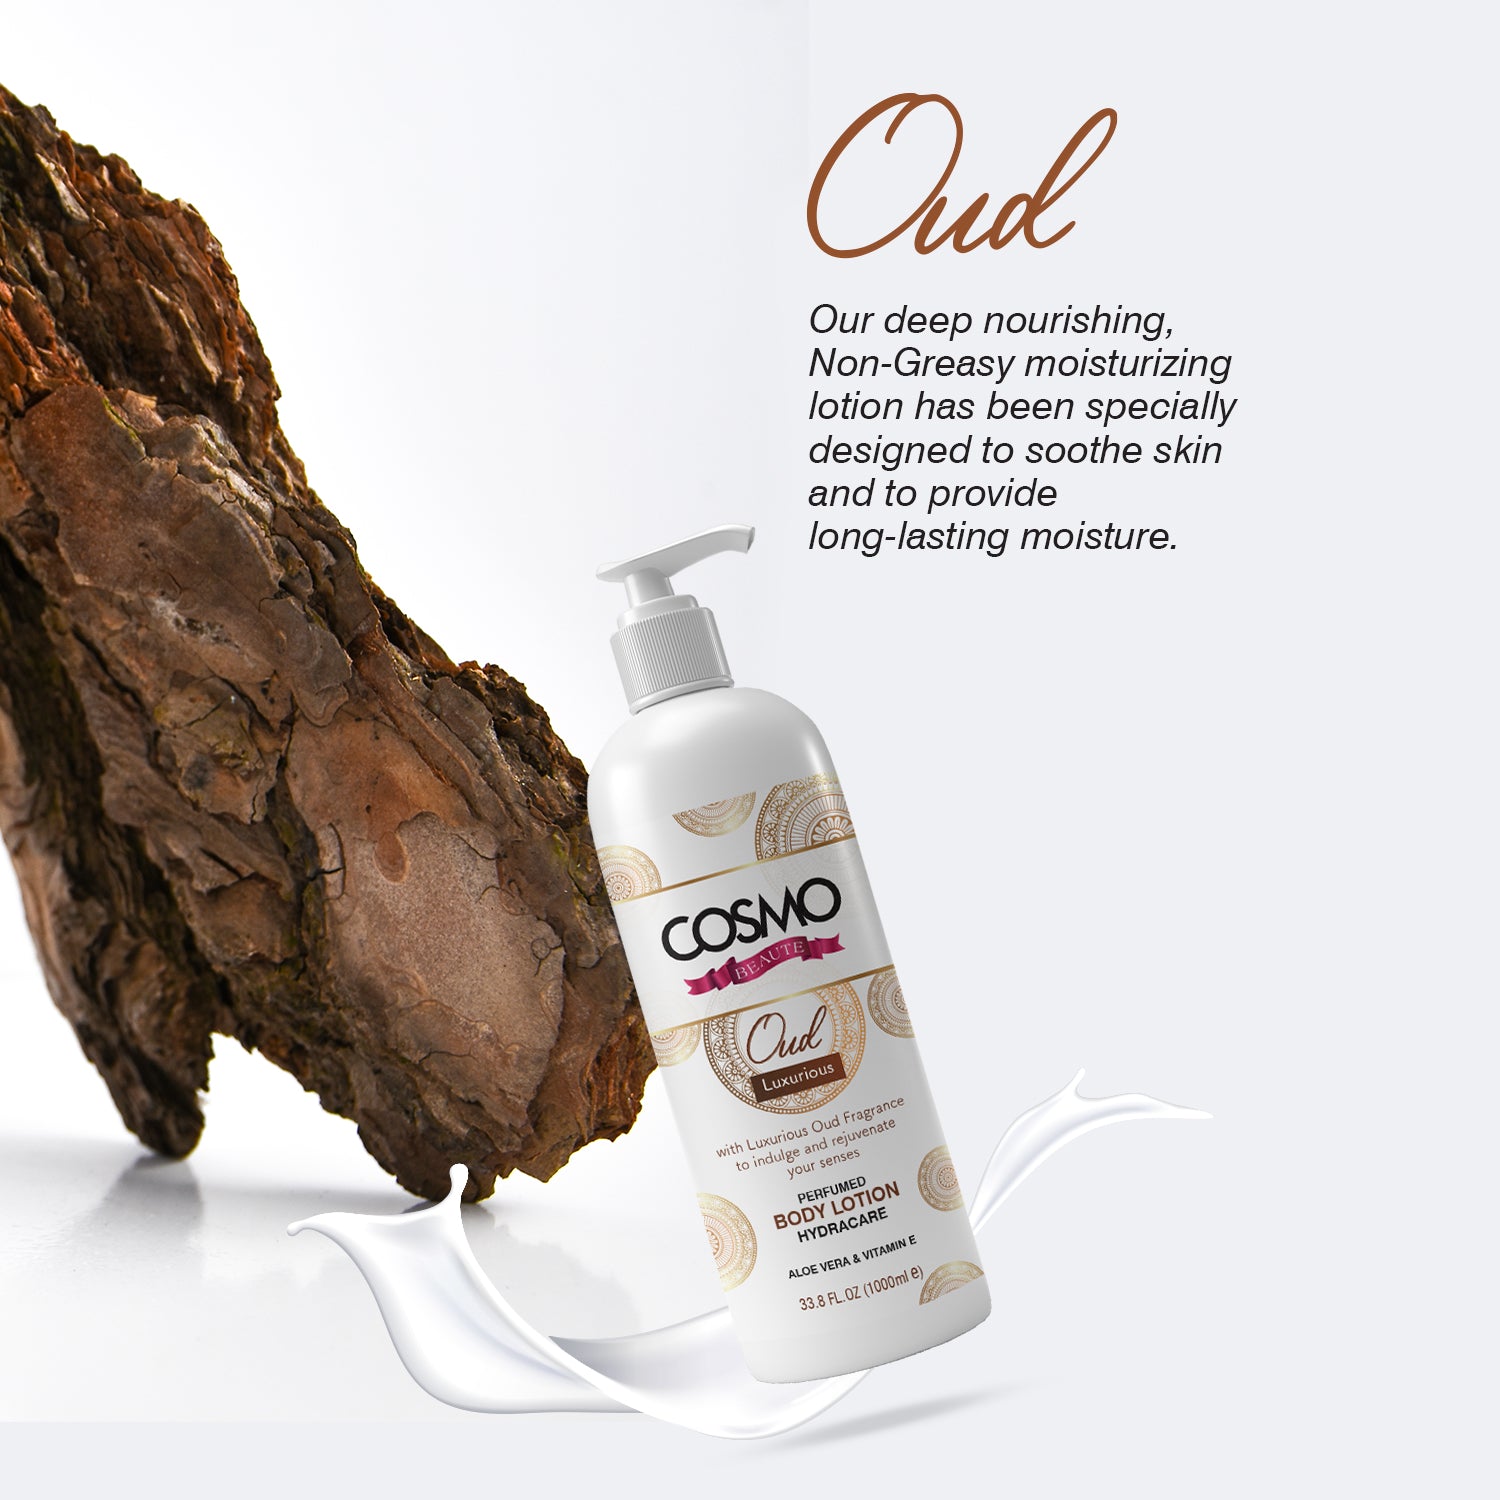 Oud - Luxurious Cosmo Body Lotion